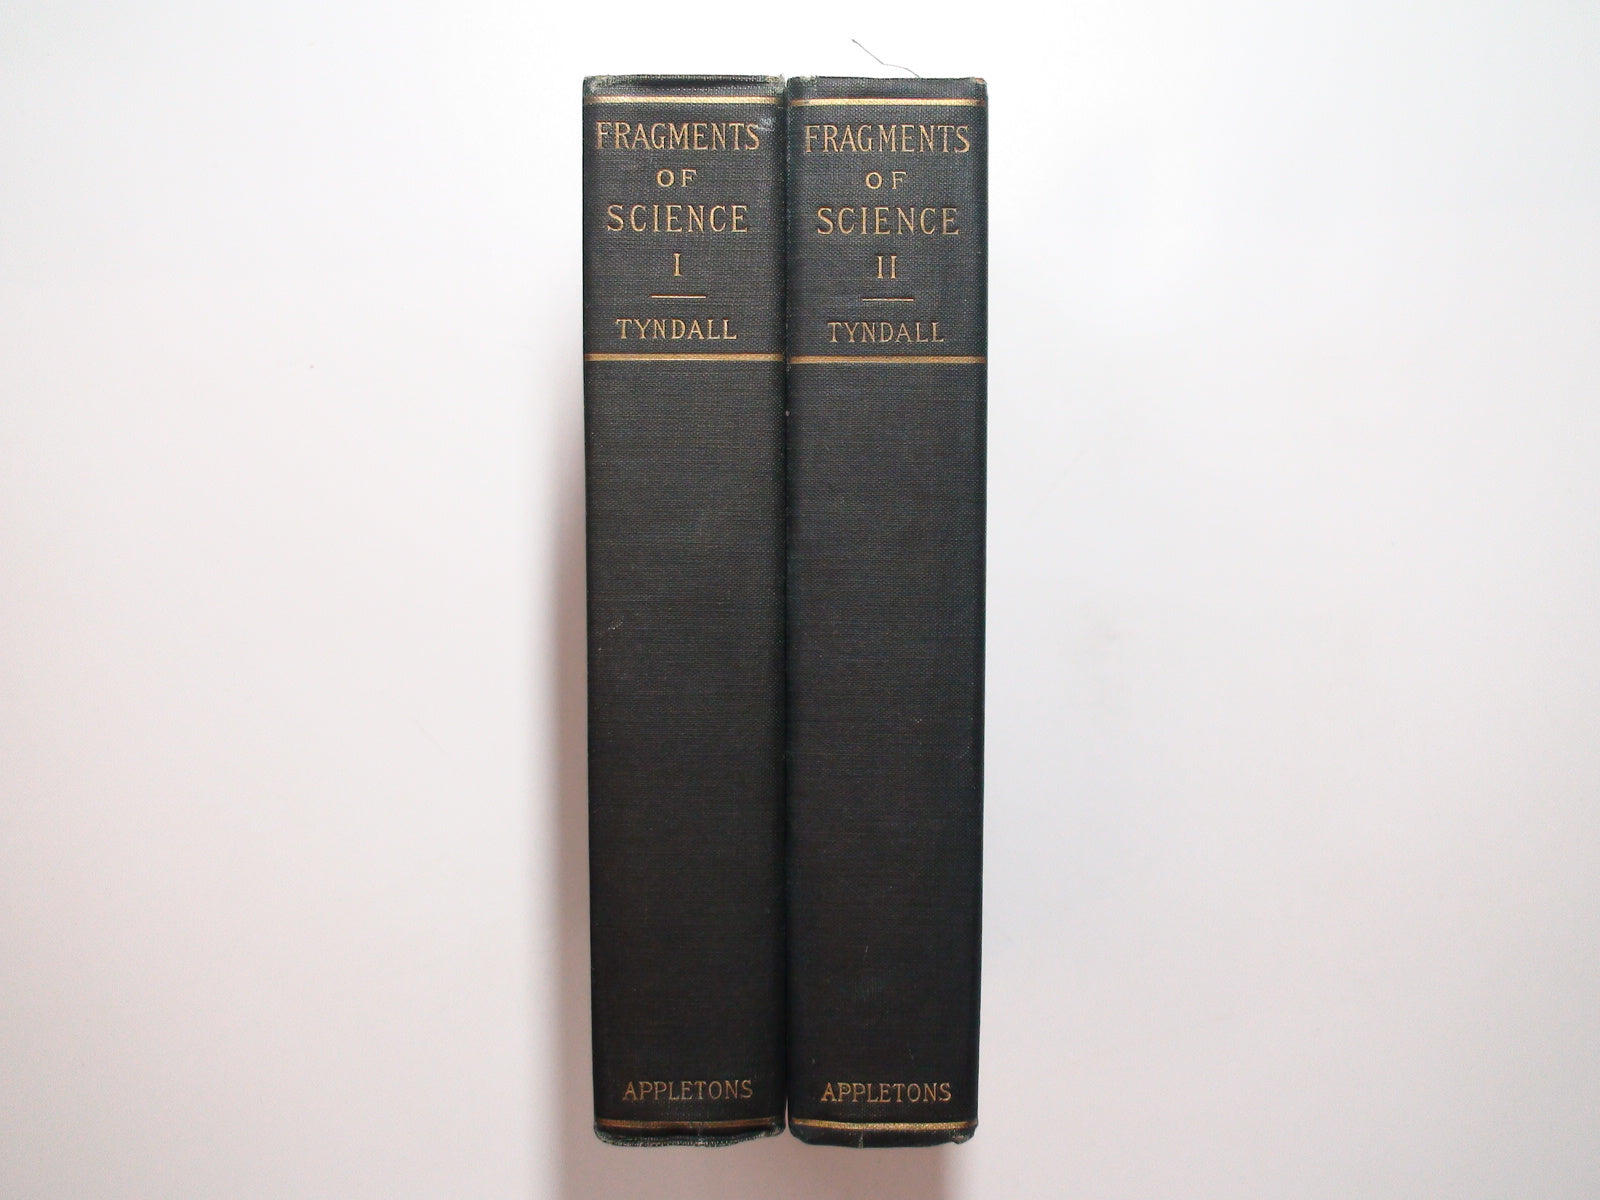 Fragments of Science, by John Tyndall, Complete in Two Vols, Authorized Ed, 1898